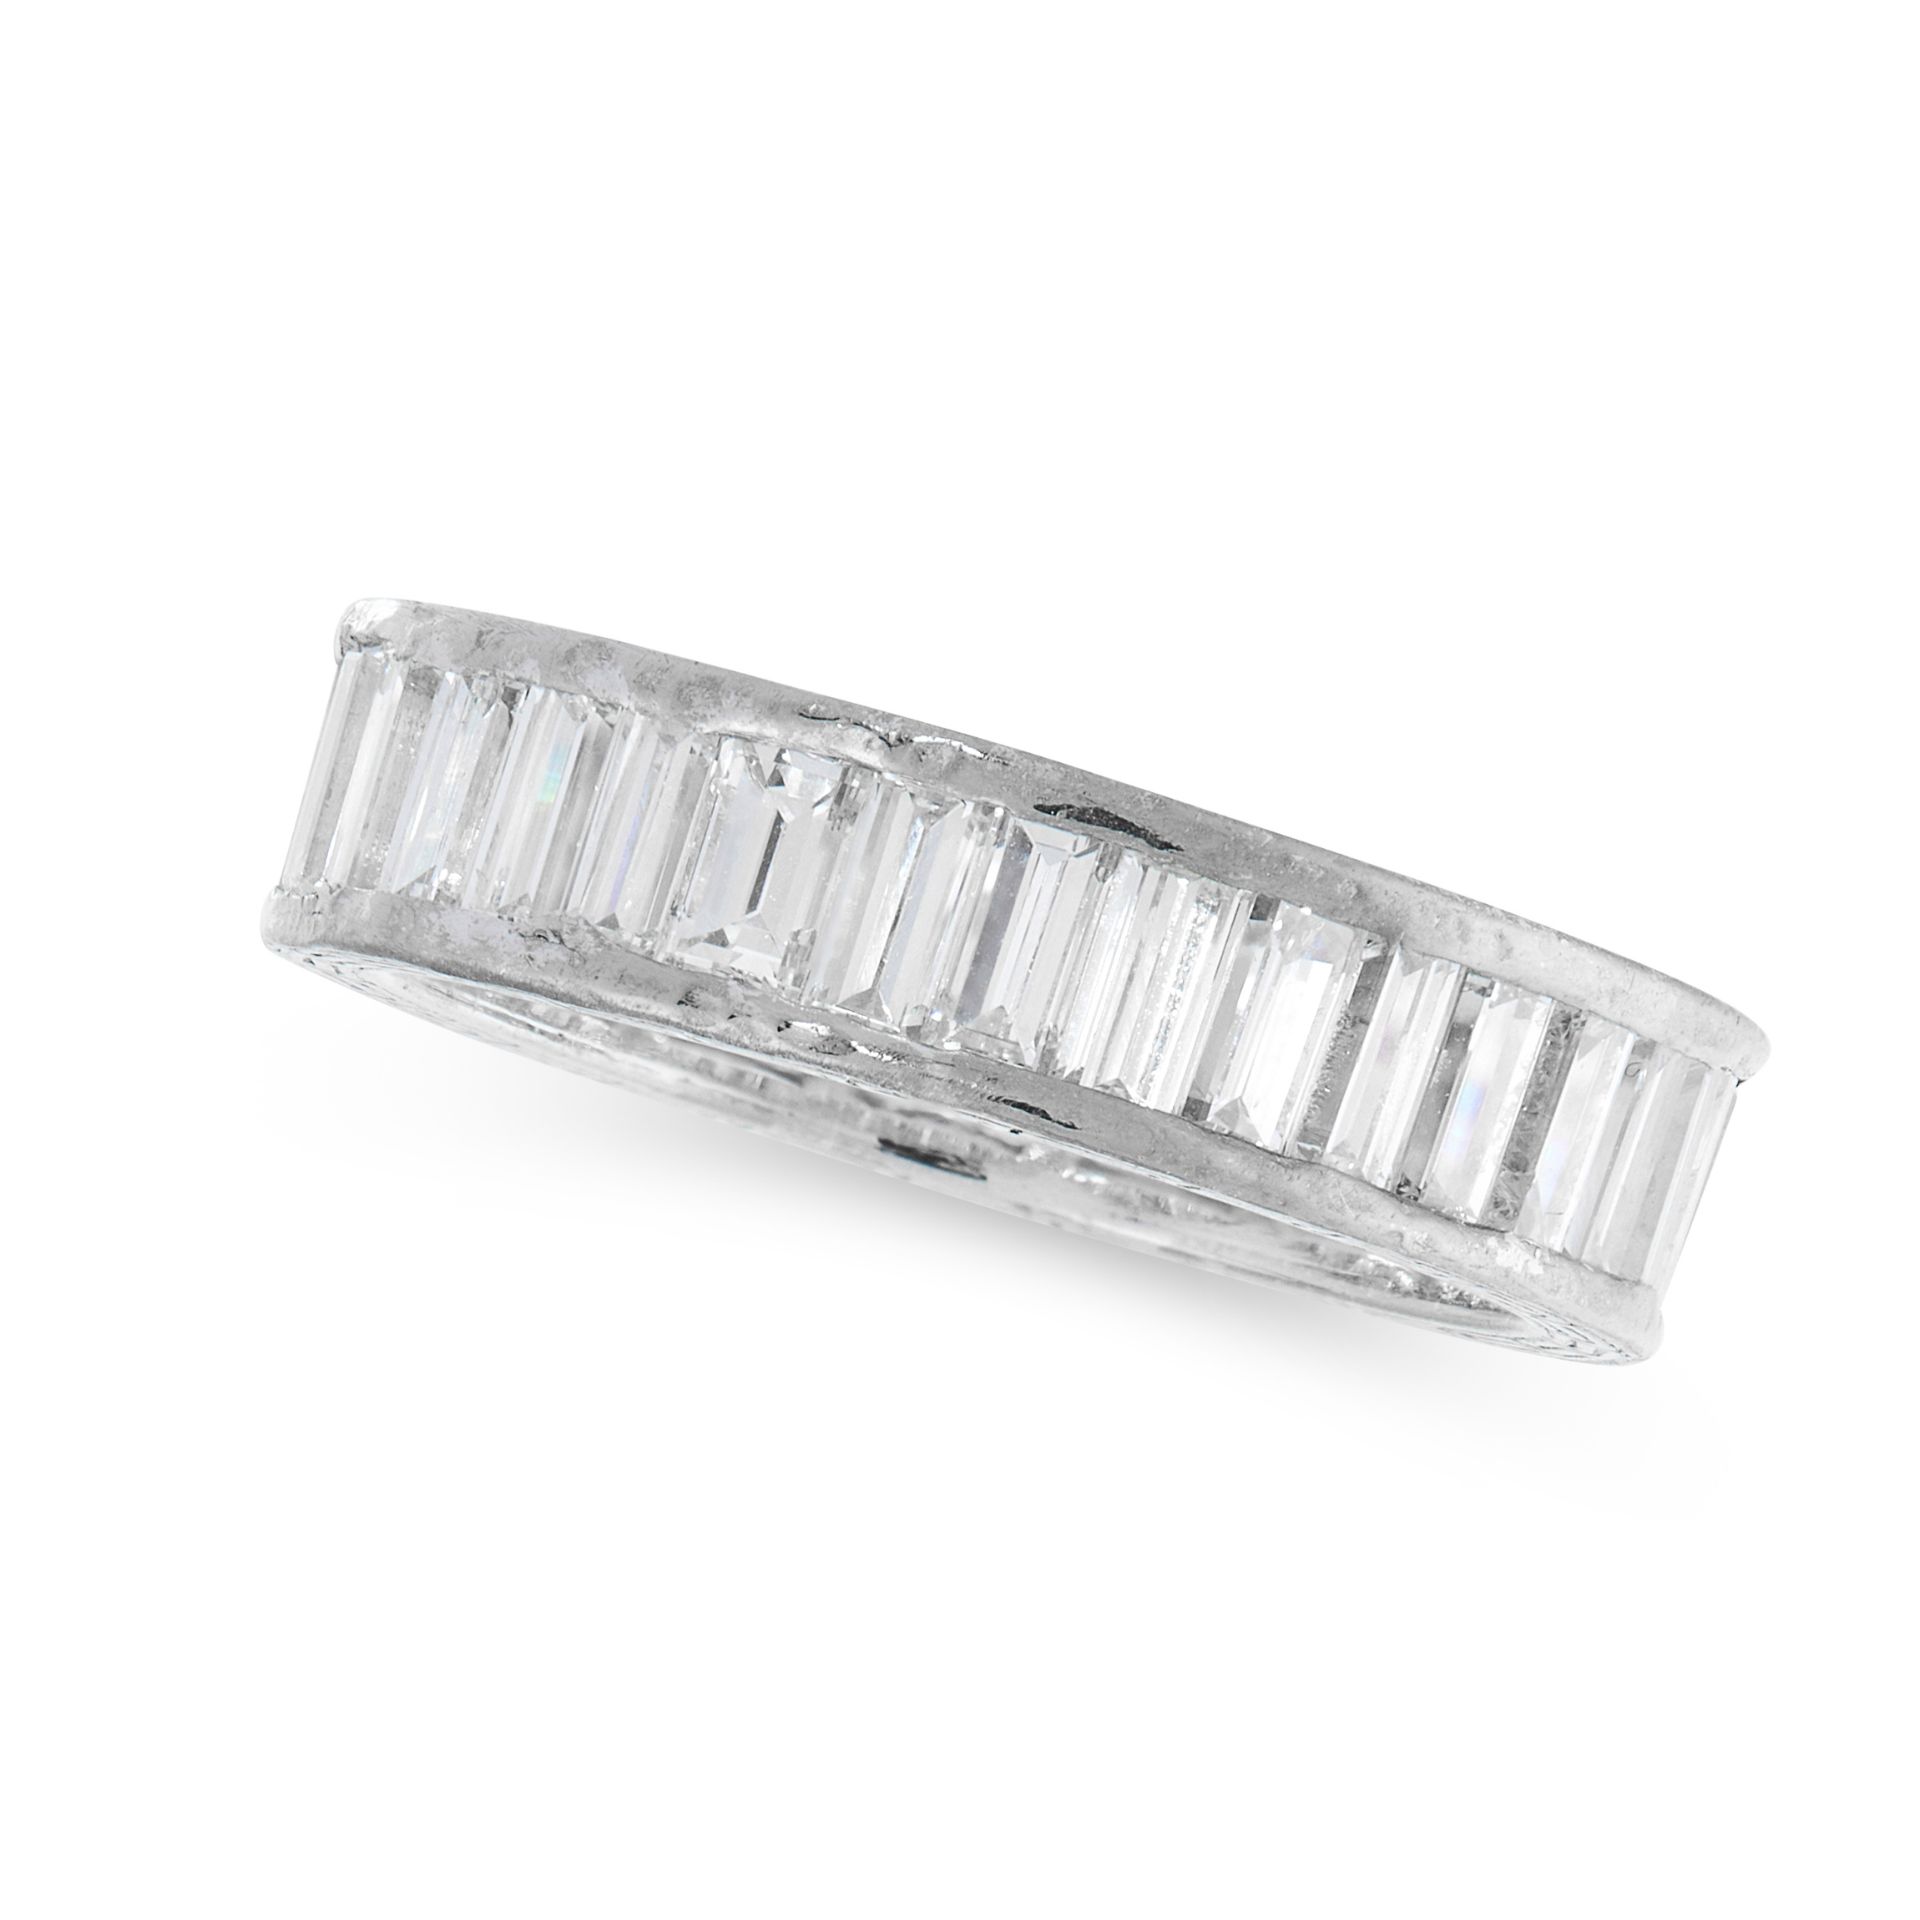 A DIAMOND ETERNITY BAND RING set all around with a single row of baguette cut diamonds, the diamonds